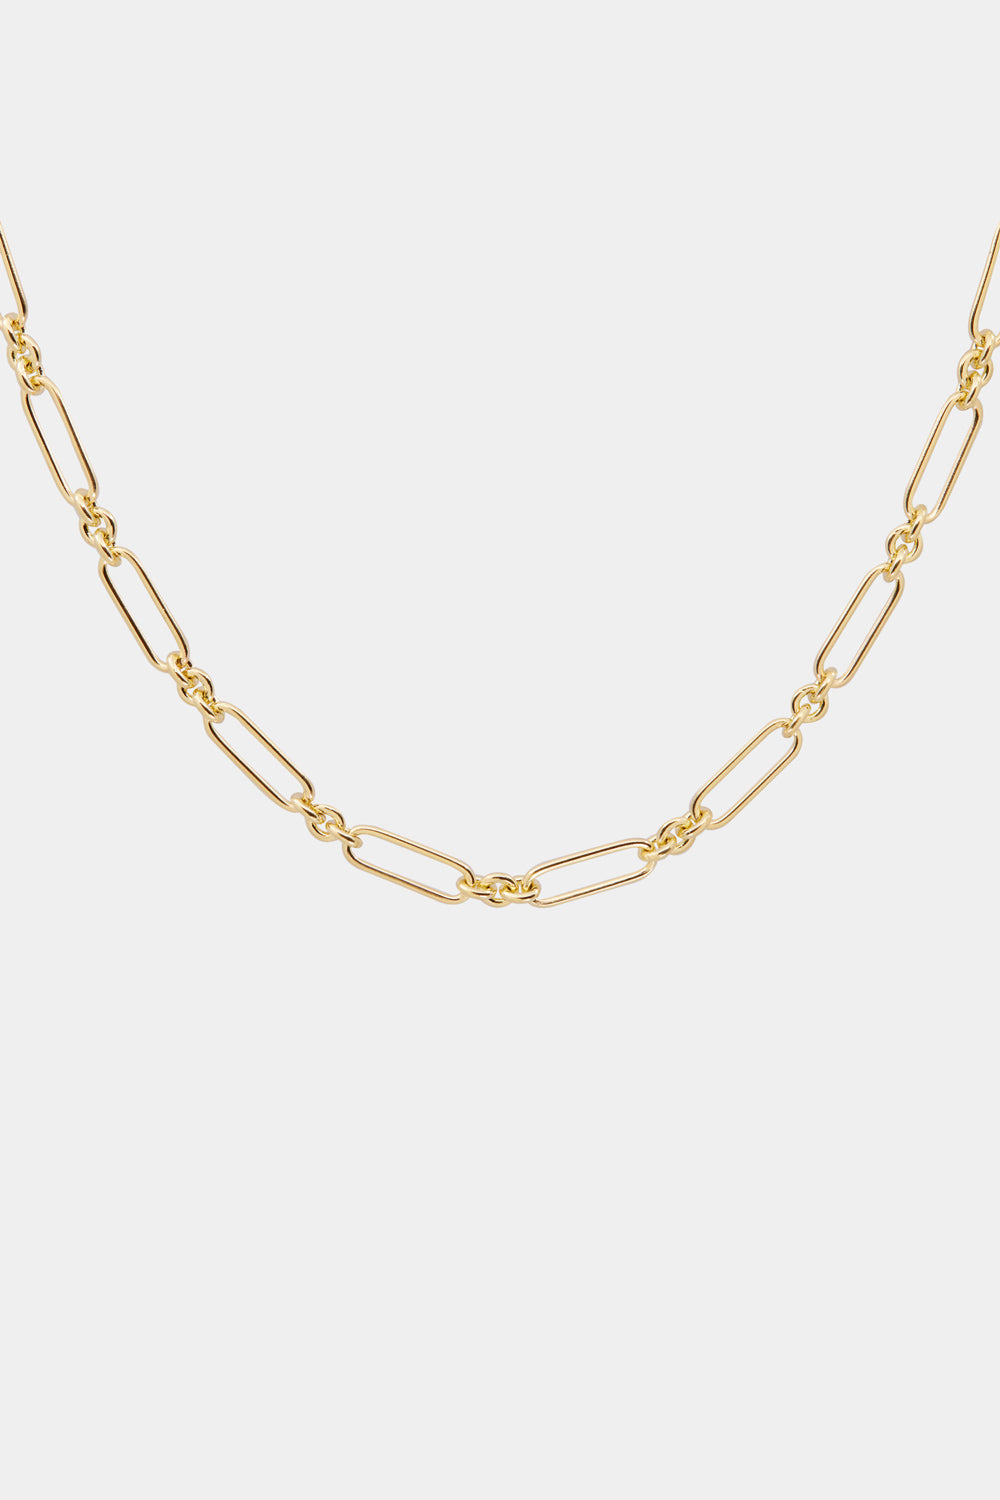 Mini Lennox Necklace | Yellow Gold, More Options Available